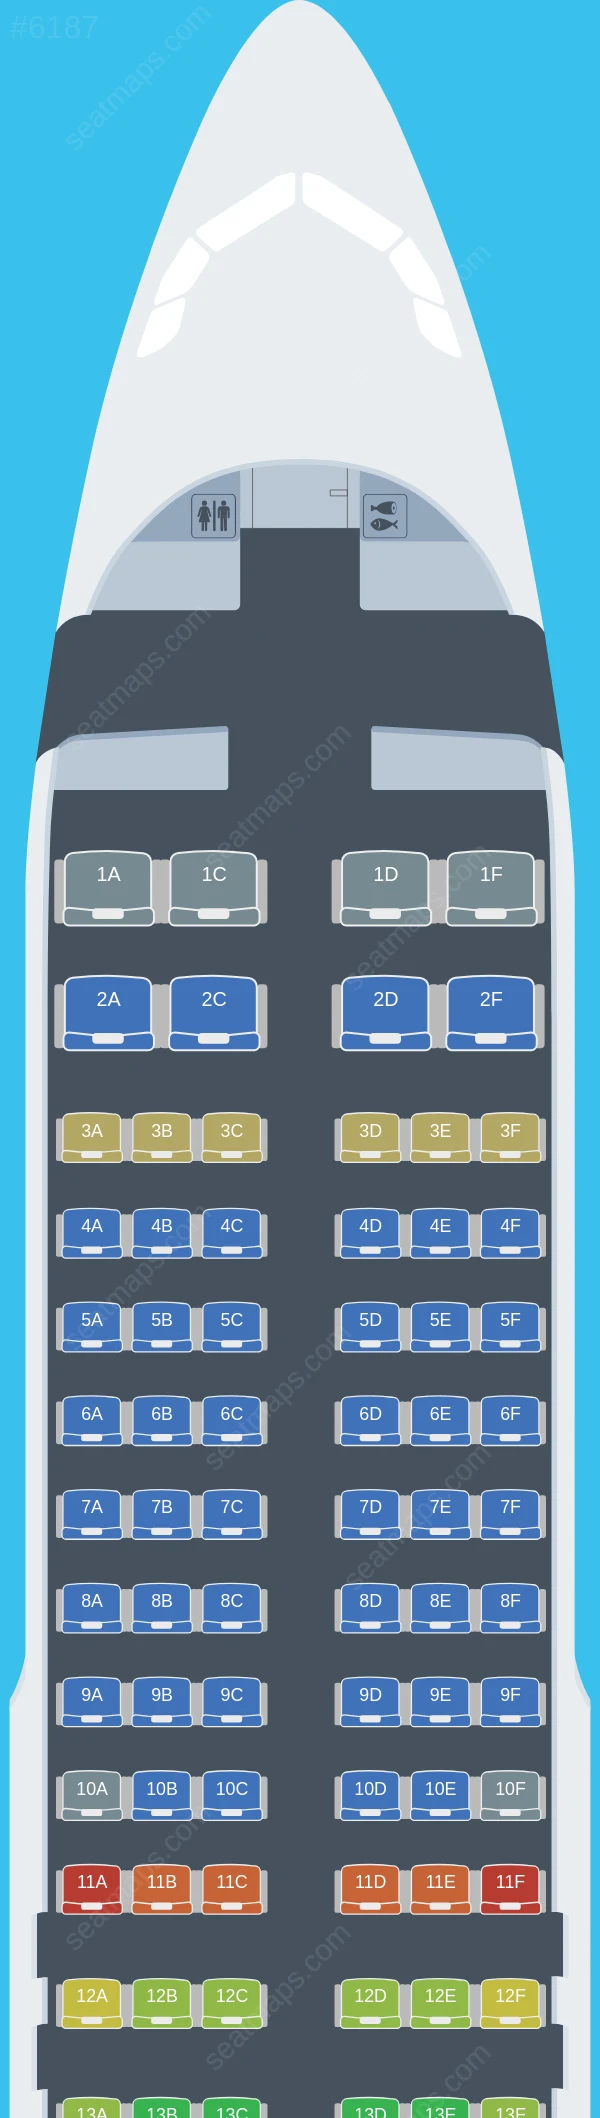 Spirit Airlines Airbus A320-200 V.1 seatmap preview